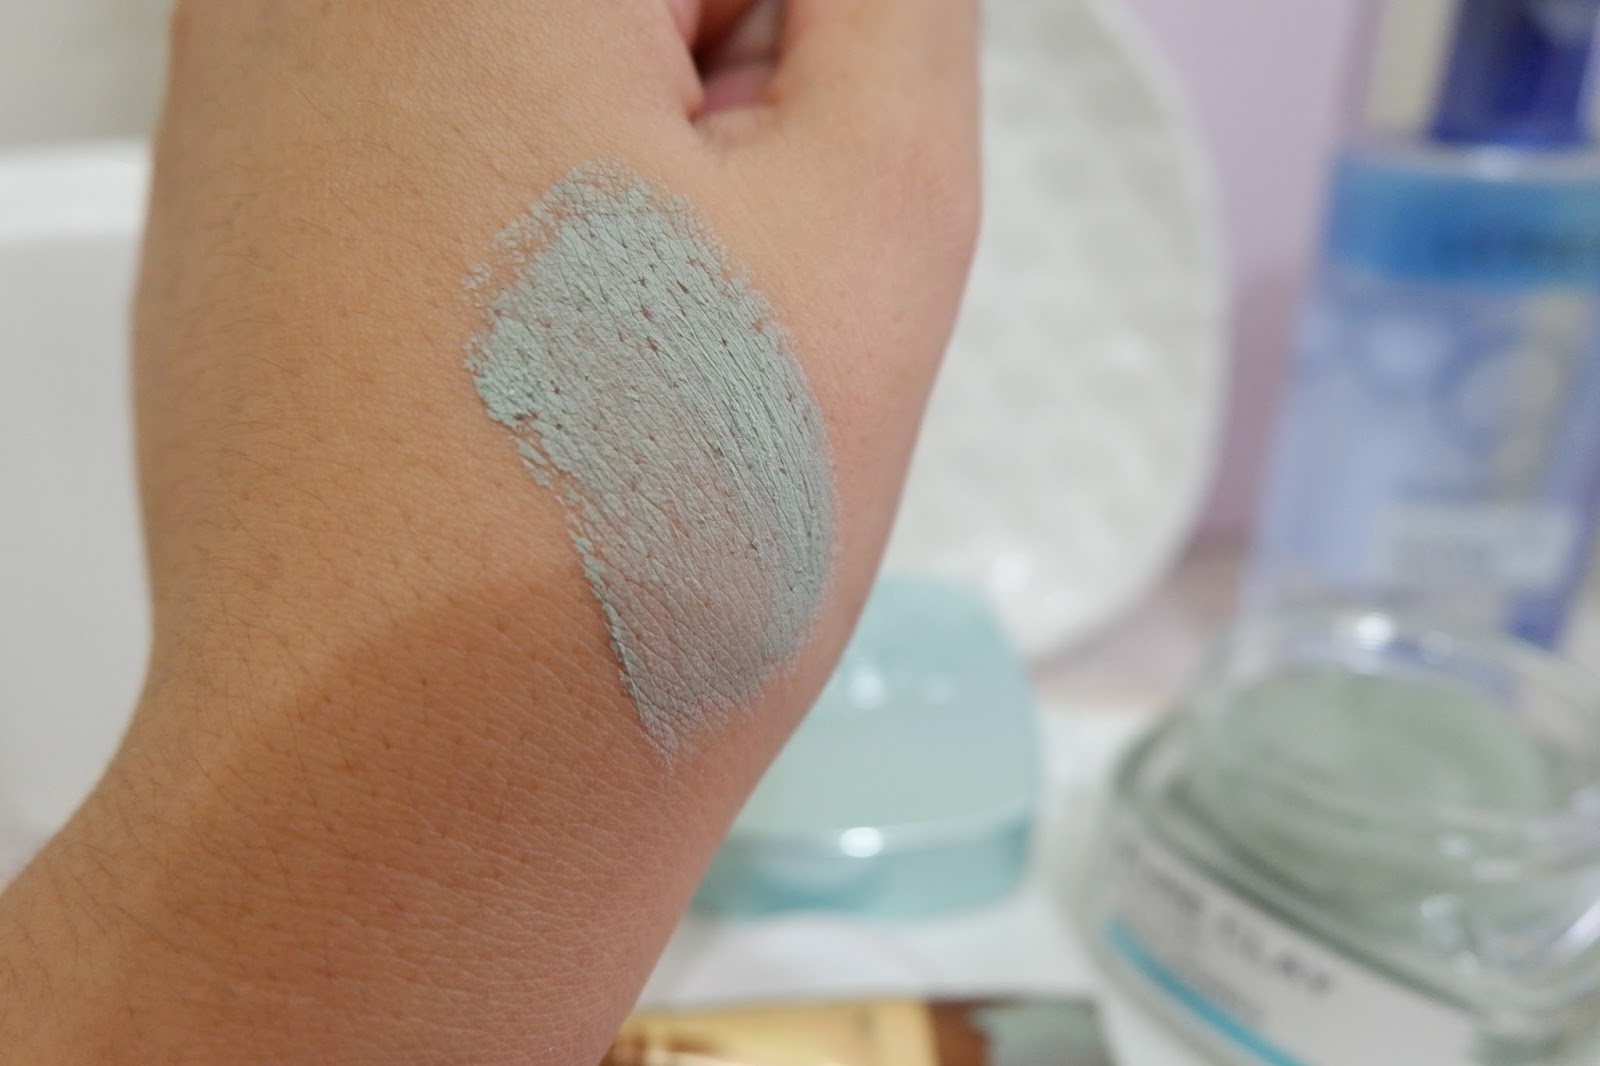 L'OREAL PURE CLAY MASK ANTI-PORES & HYDRATING REVIEW